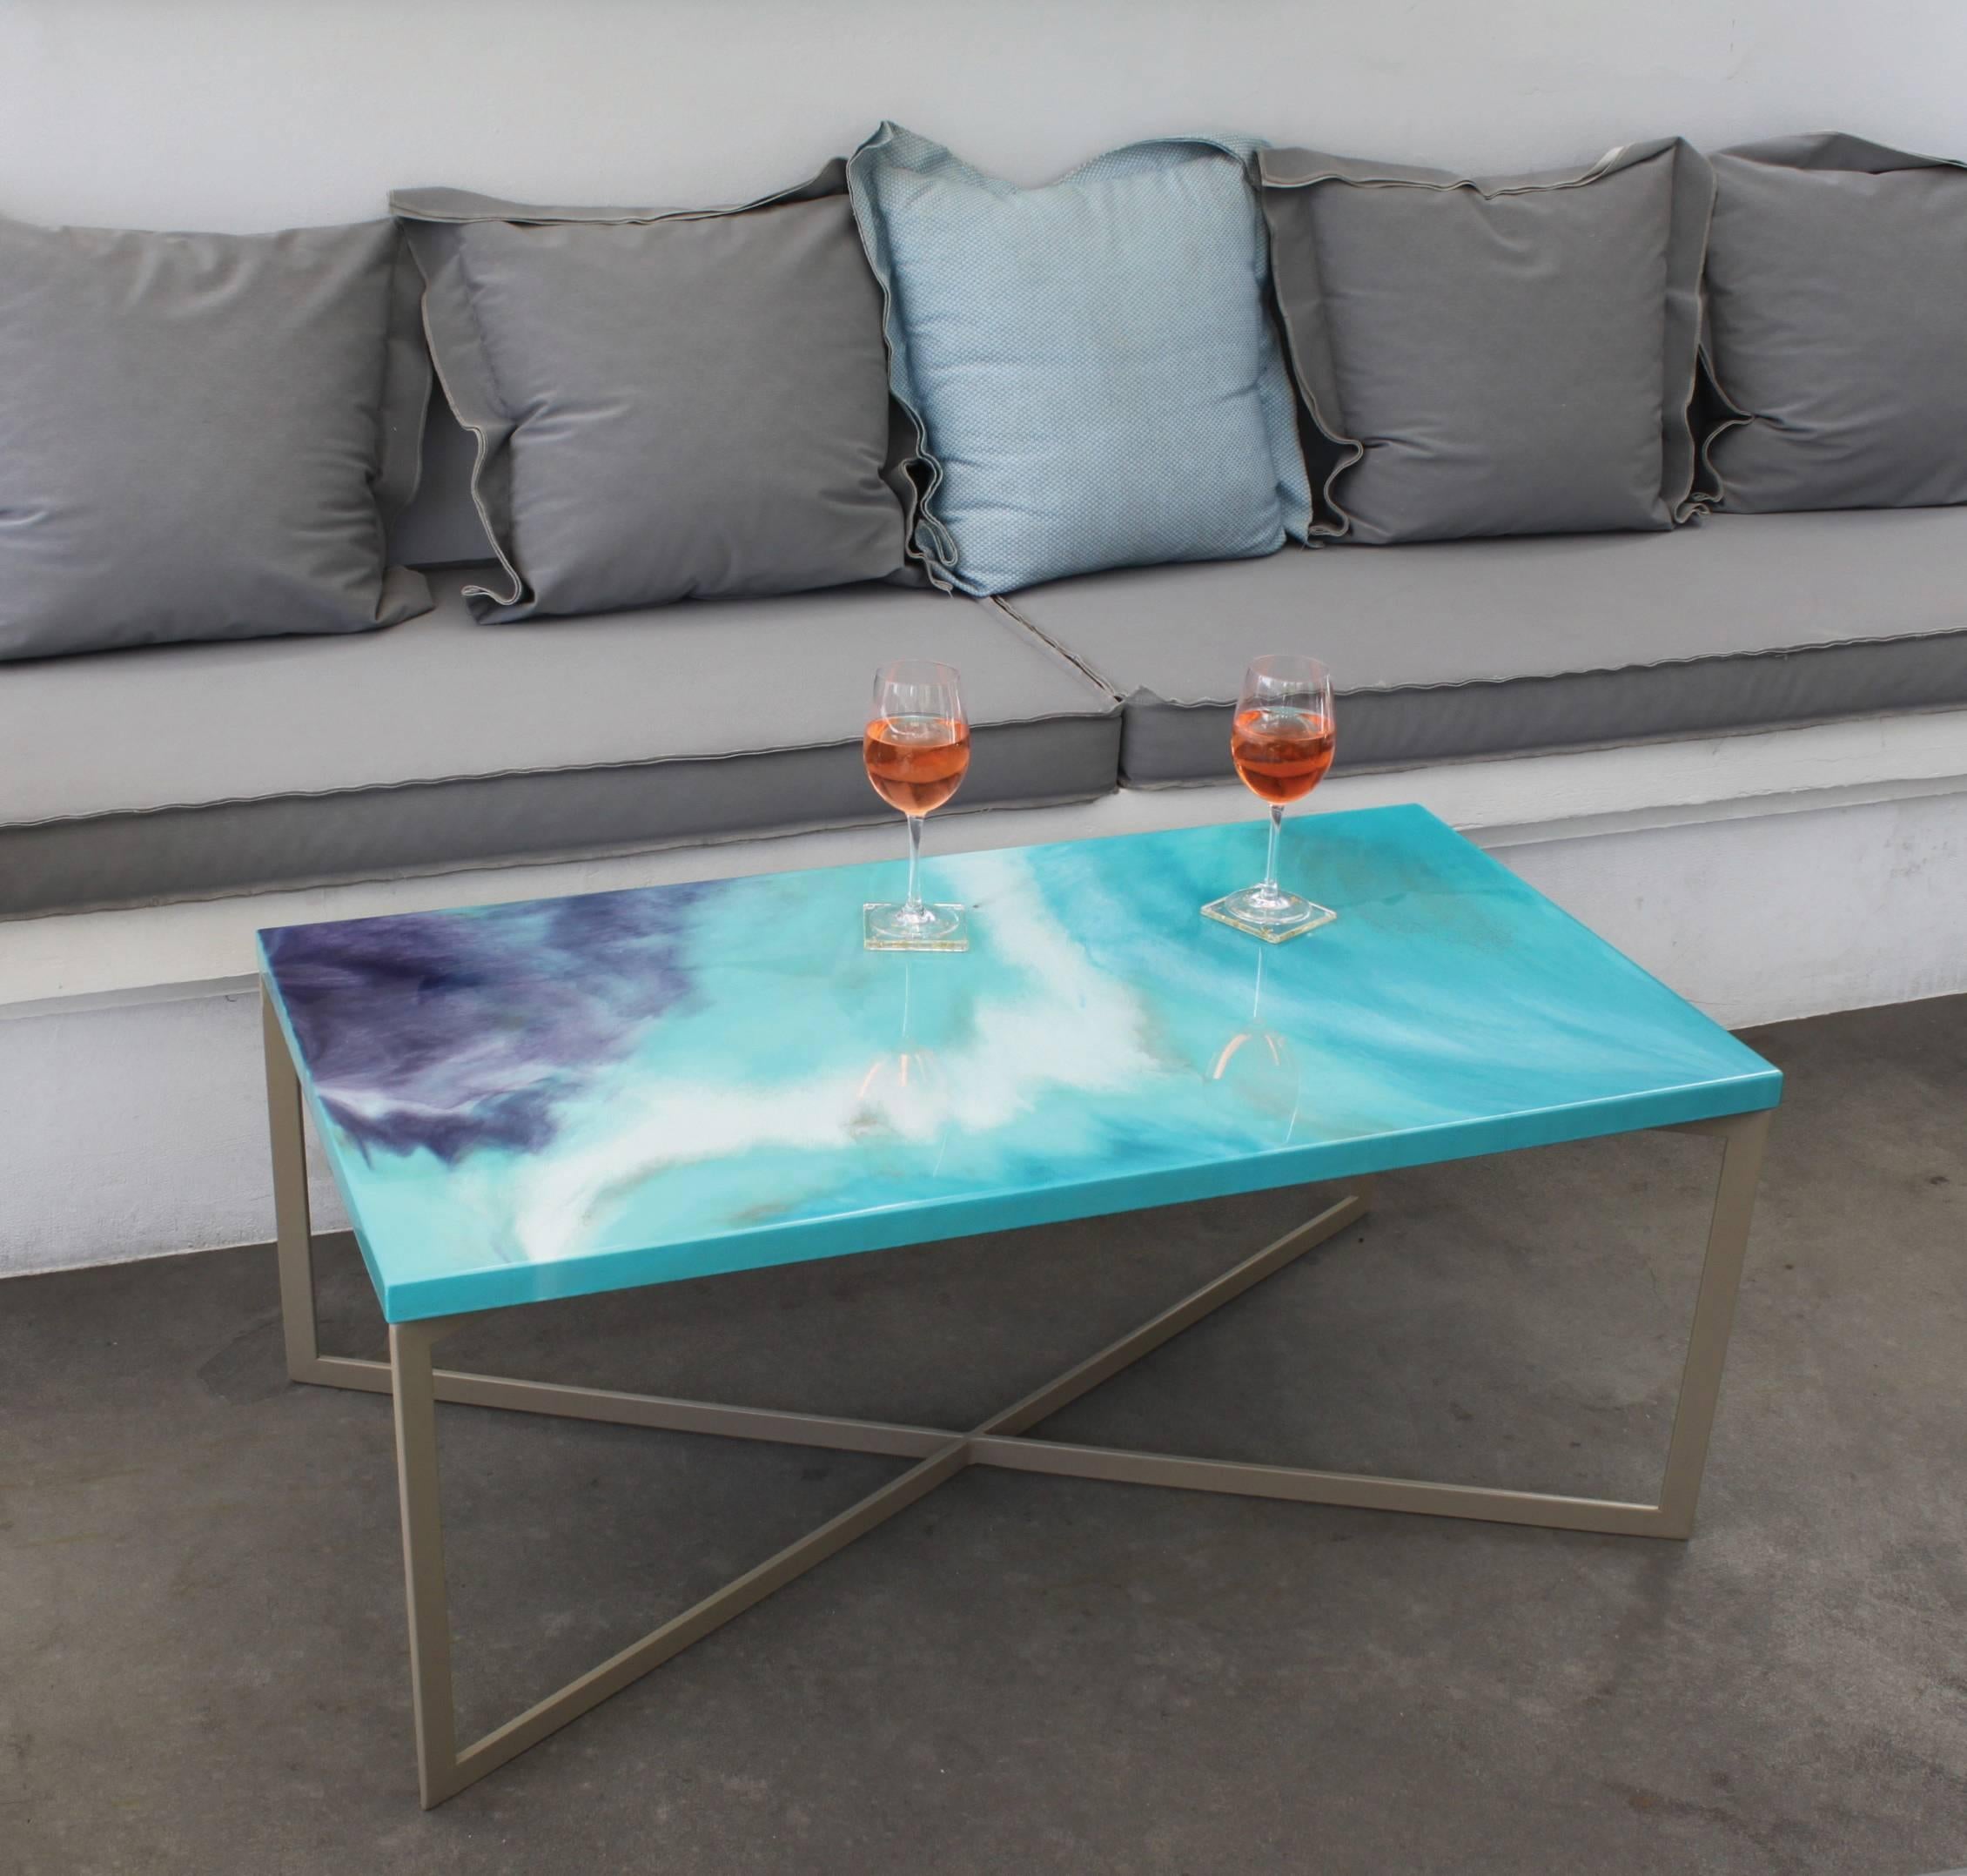 This elegant handmade coffee table is part of the Viscosity Art & Resin Gallery collection. The tabletop is made of handcrafted layers of colored resin on plywood. The vivid color combination with the ethereal flows makes this coffee table a unique